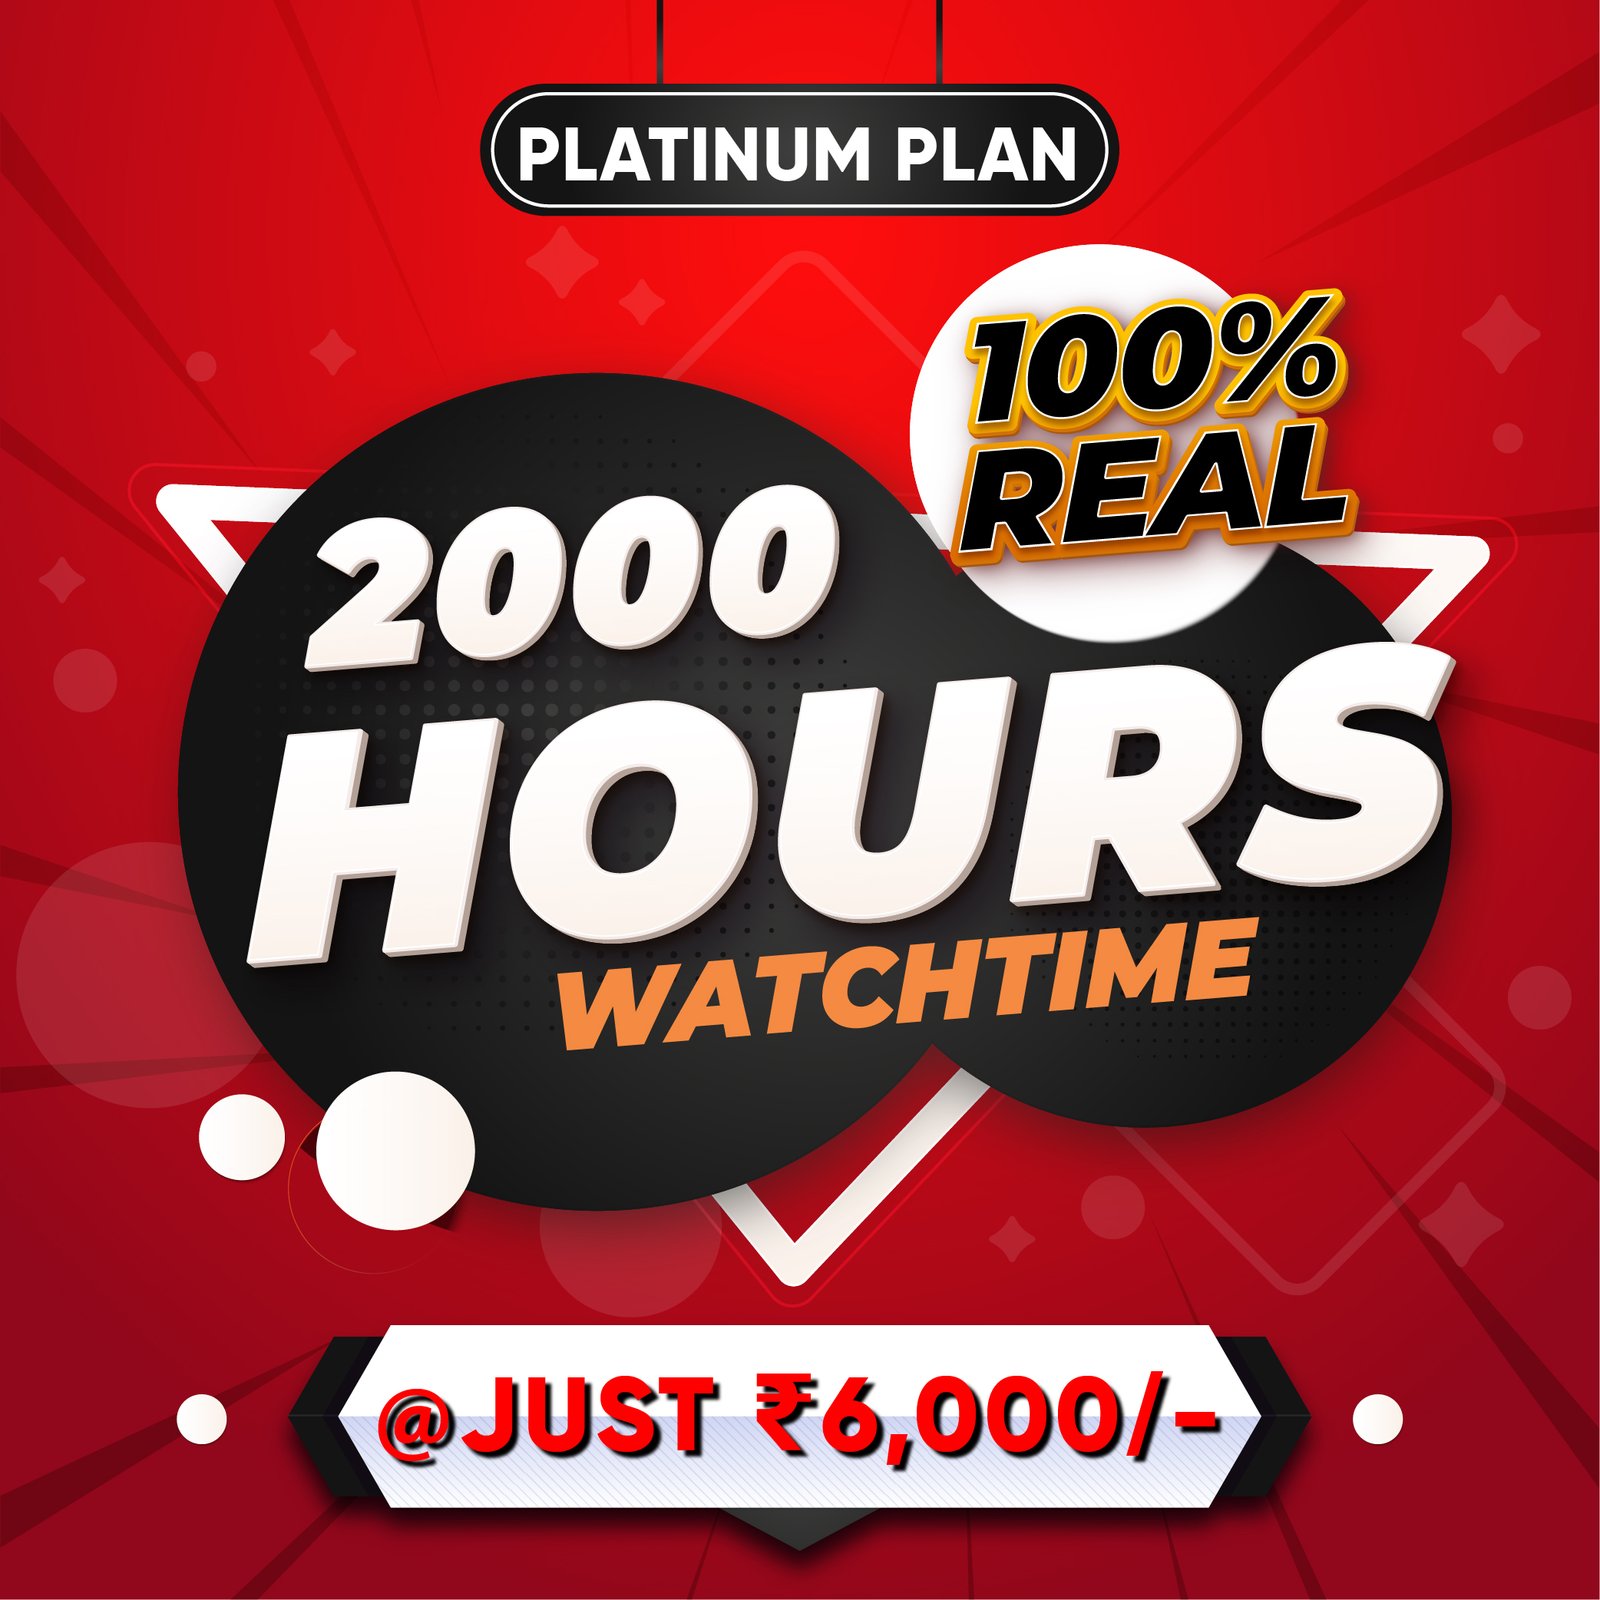 Get 2,000 Hours Real YouTube Watchtime